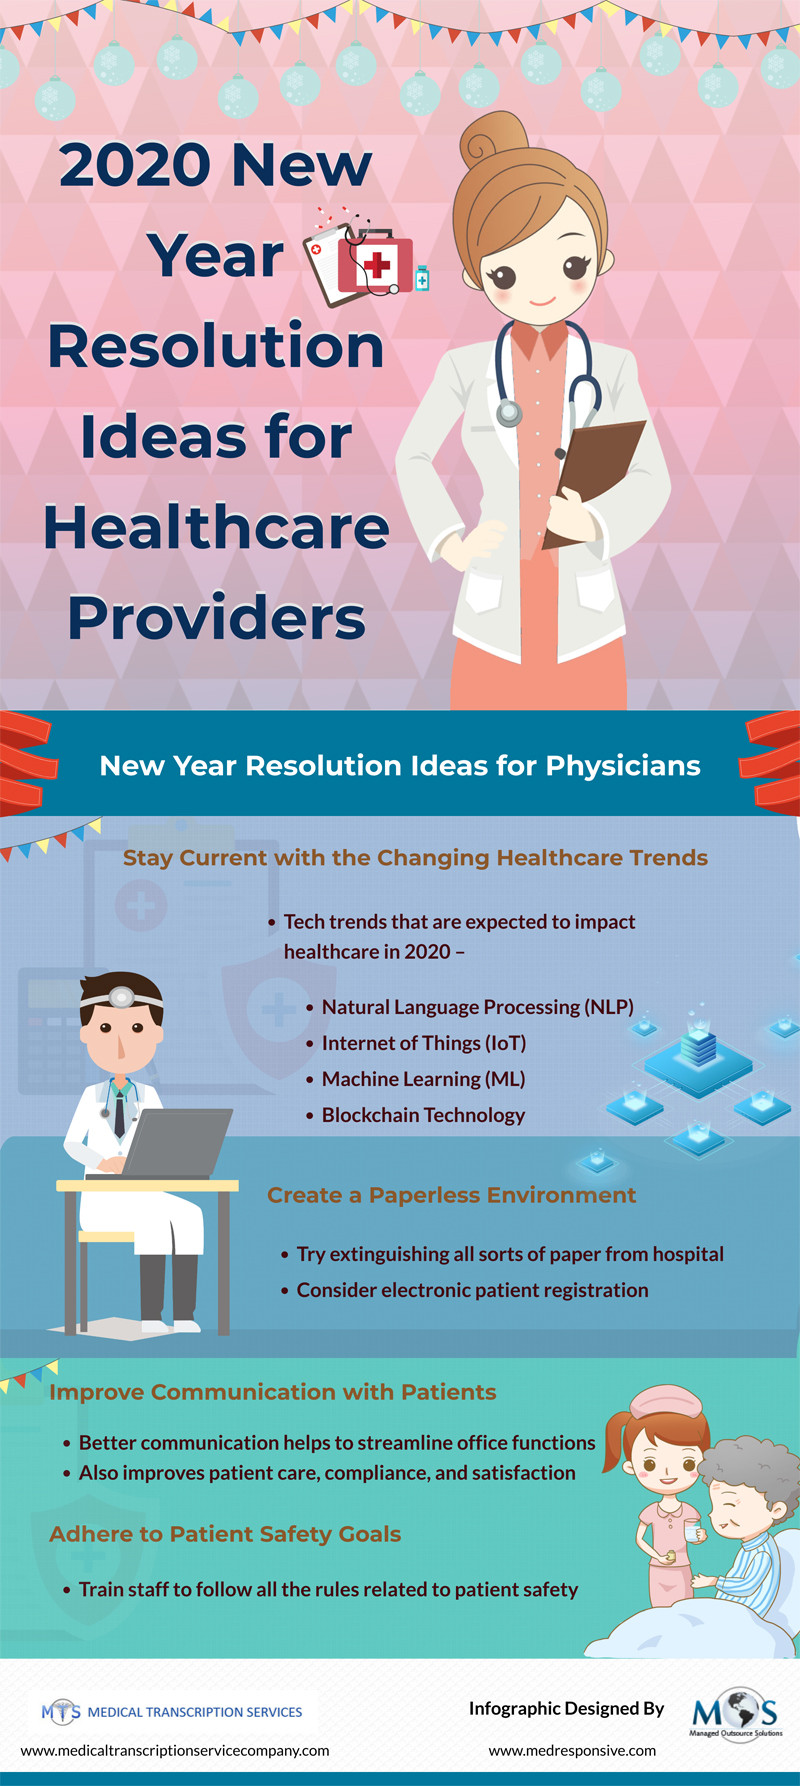 New Year Resolution Ideas 2020
 2020 New Year Resolution Ideas for Healthcare Providers